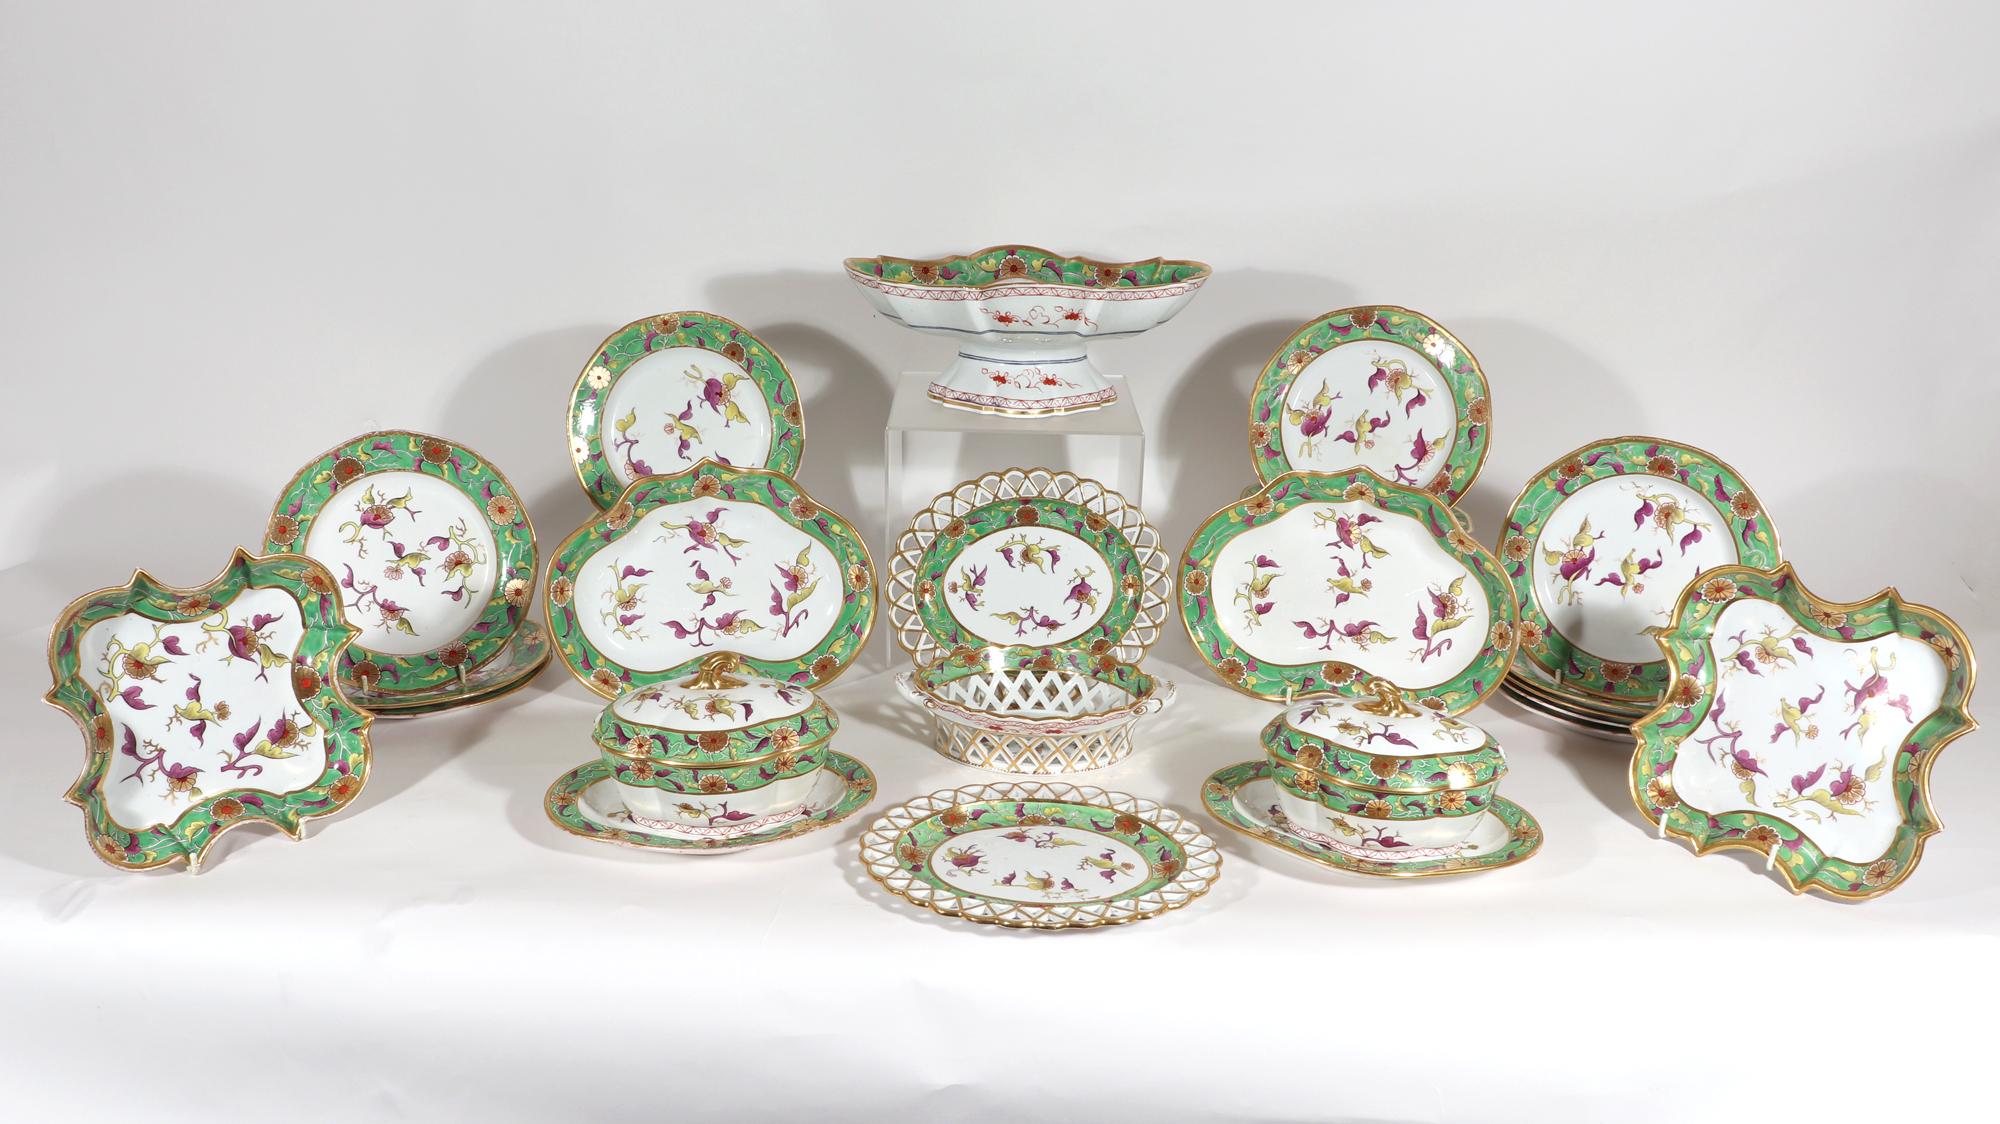 Spode Porcelain Dessert Service, Pattern # 302, Thirty Two Pieces 14